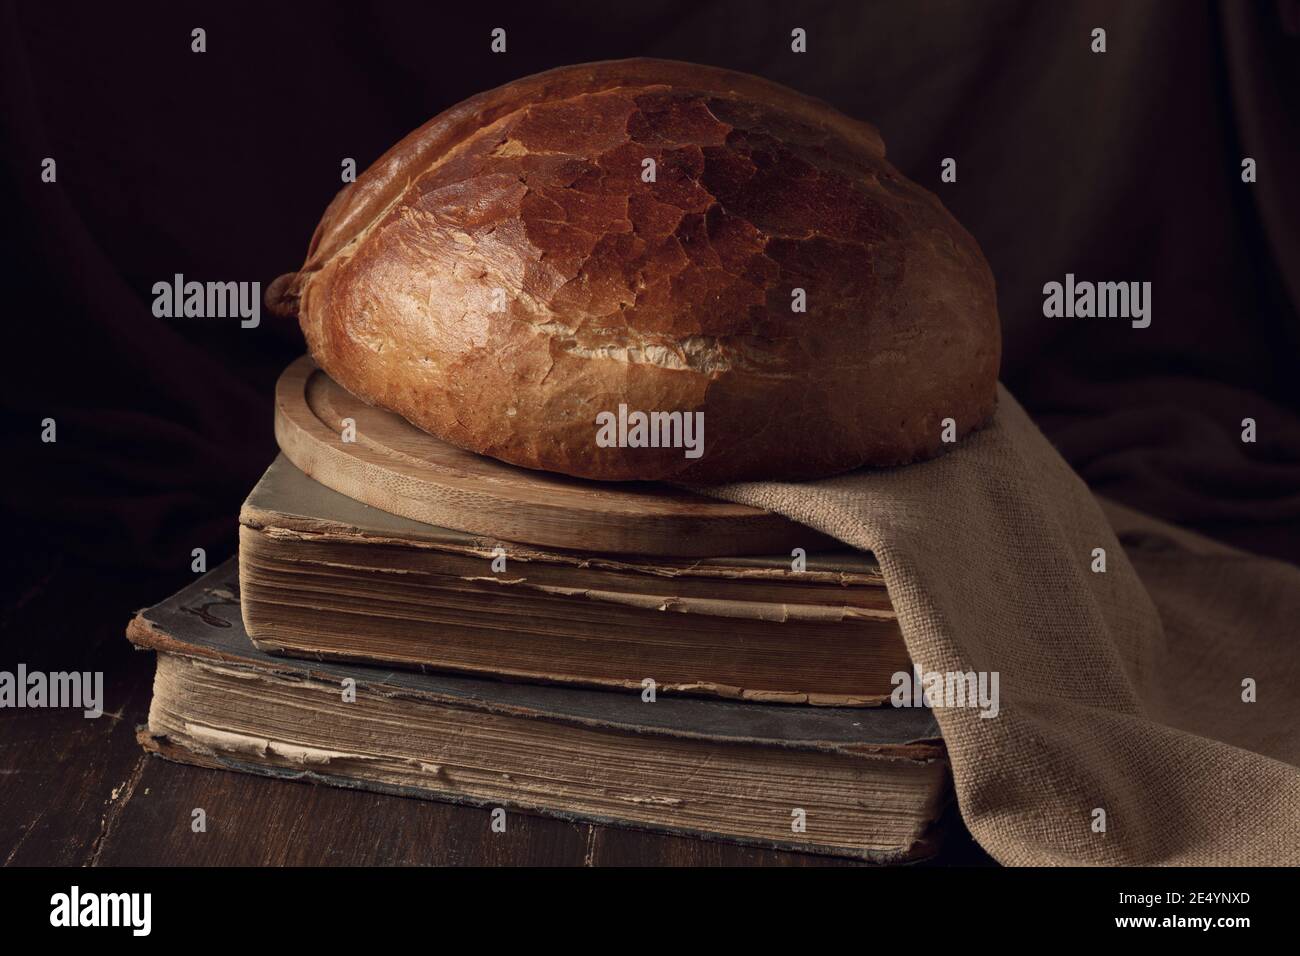 loaf of bread, in futuristic style , on old books, wooden table, brown background, no people, horizontal Stock Photo